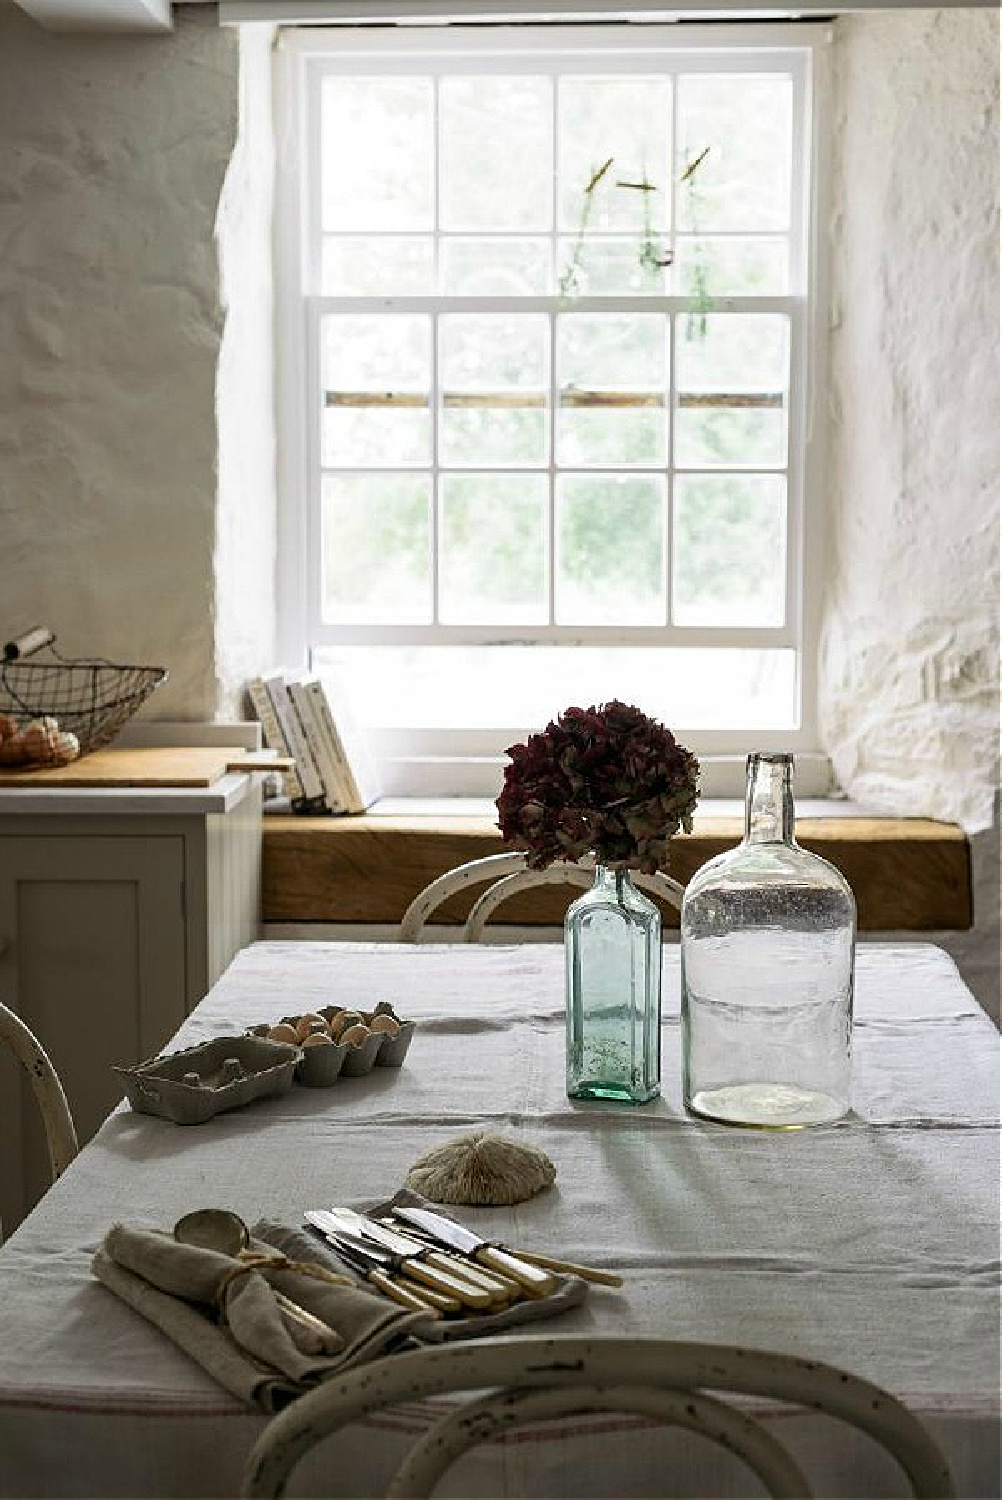 Beautifully rustic English country kitchen in the UK by deVOL has Shaker style cabinetry, farm sink, and a serene palette. #englishcountry #countrykitchen #kitchendesign #rustickitchen #frenchkitchen #shakerkitchen